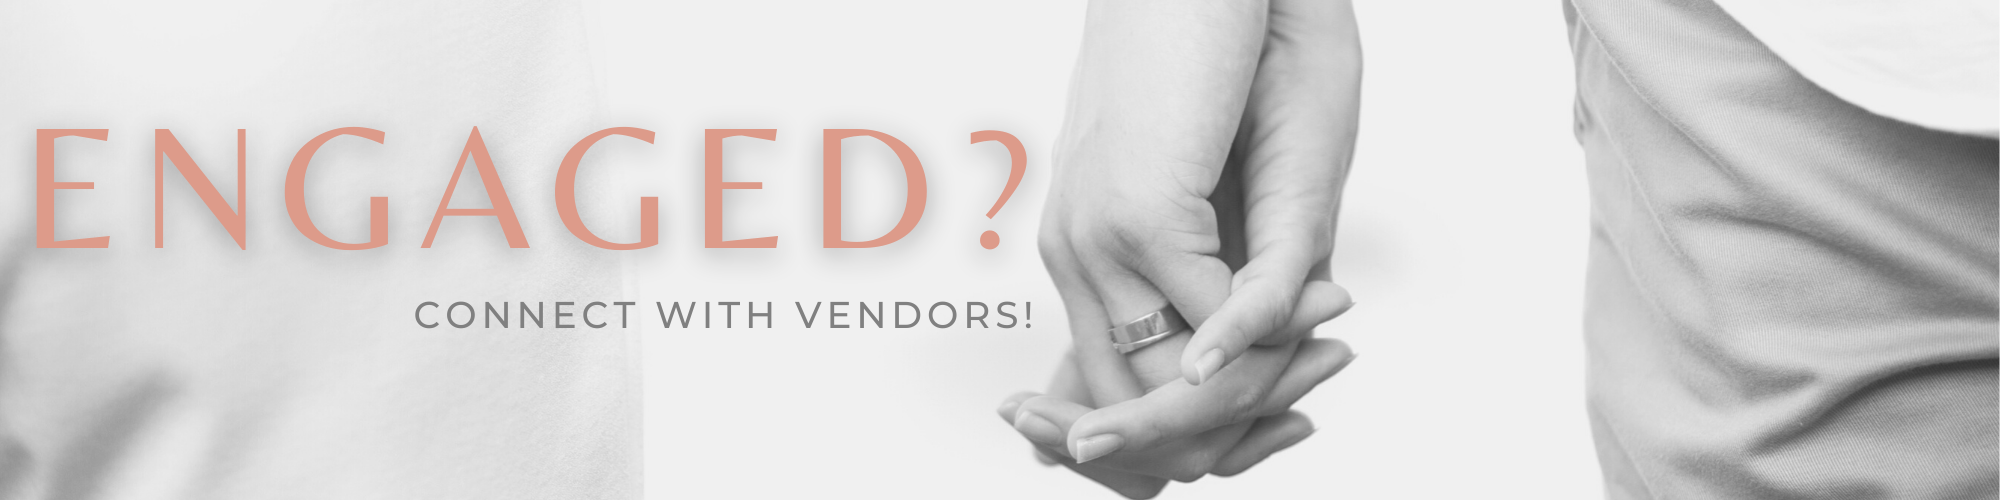 engaged? connect with vendors!